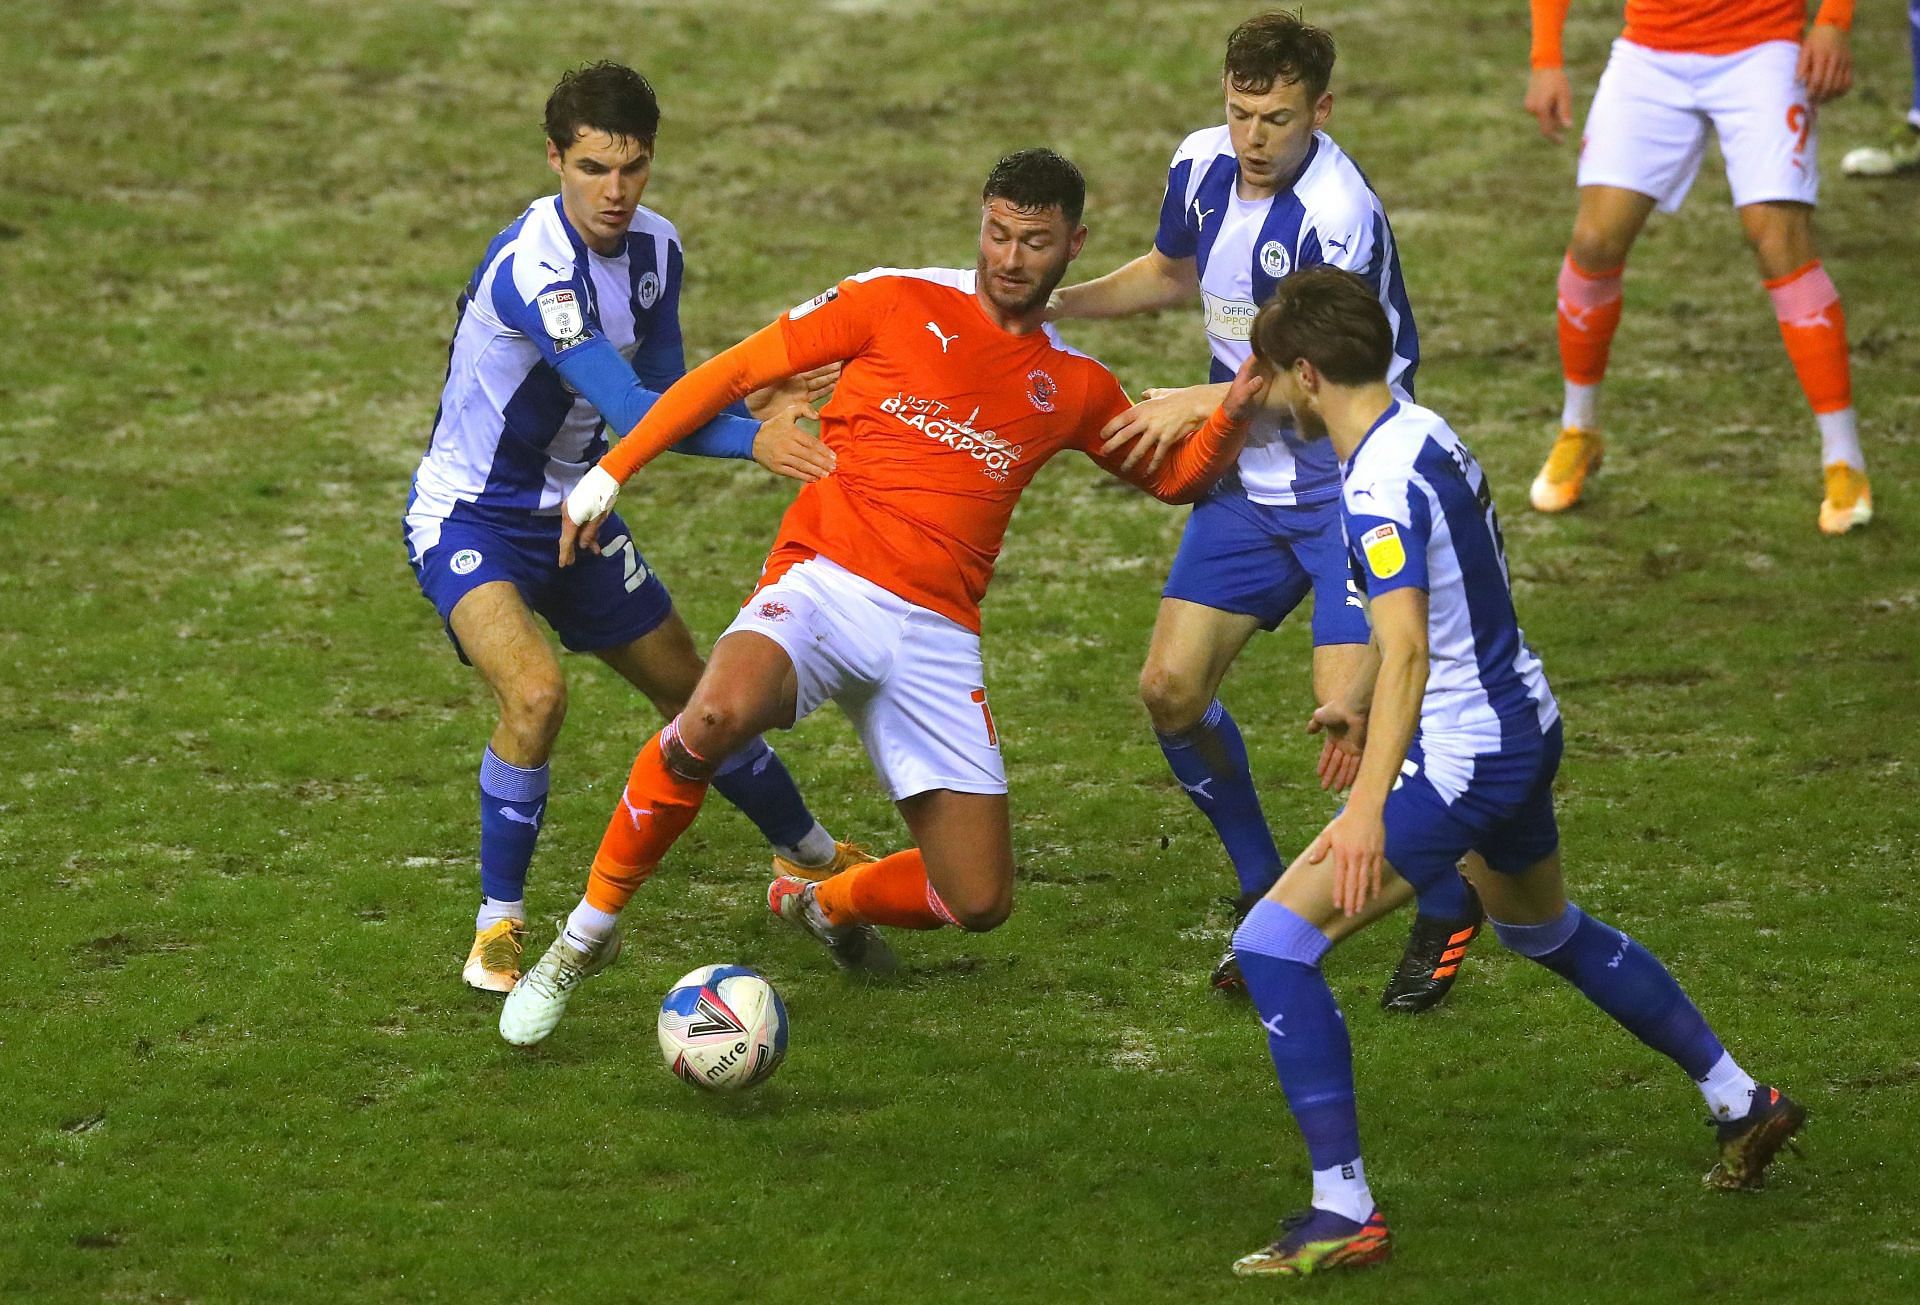 Wigan Athletic v Blackpool - Sky Bet League One